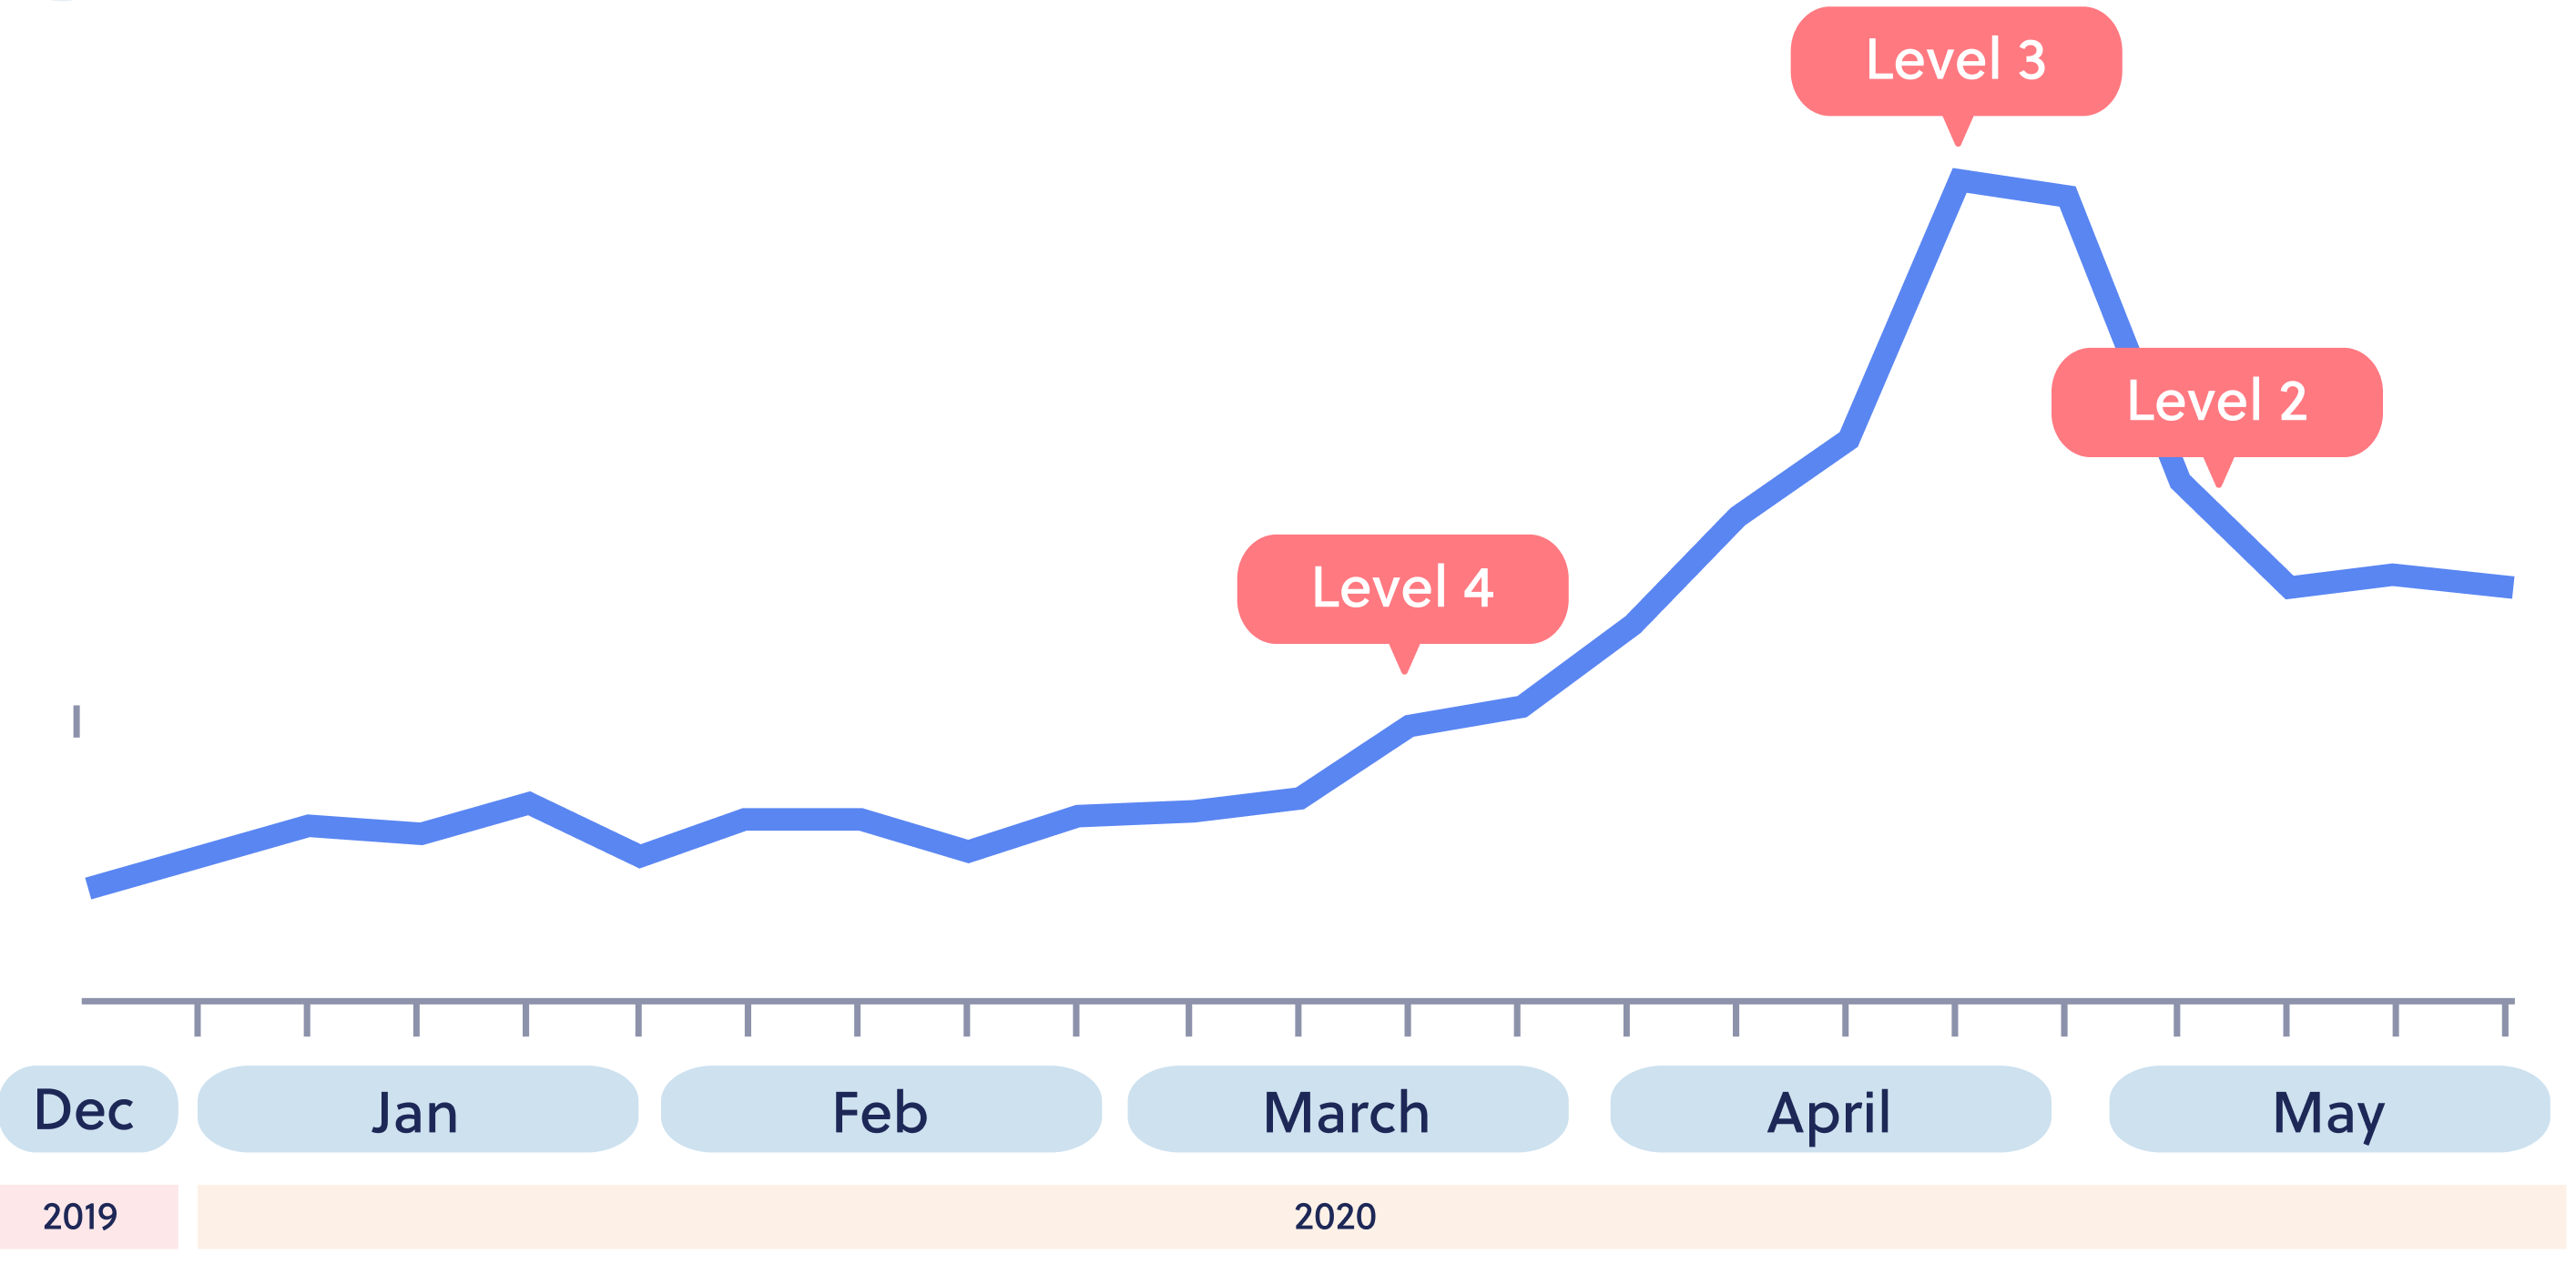 This ecommerce graph from Rocketspark shows the effect of COVID-19 on business